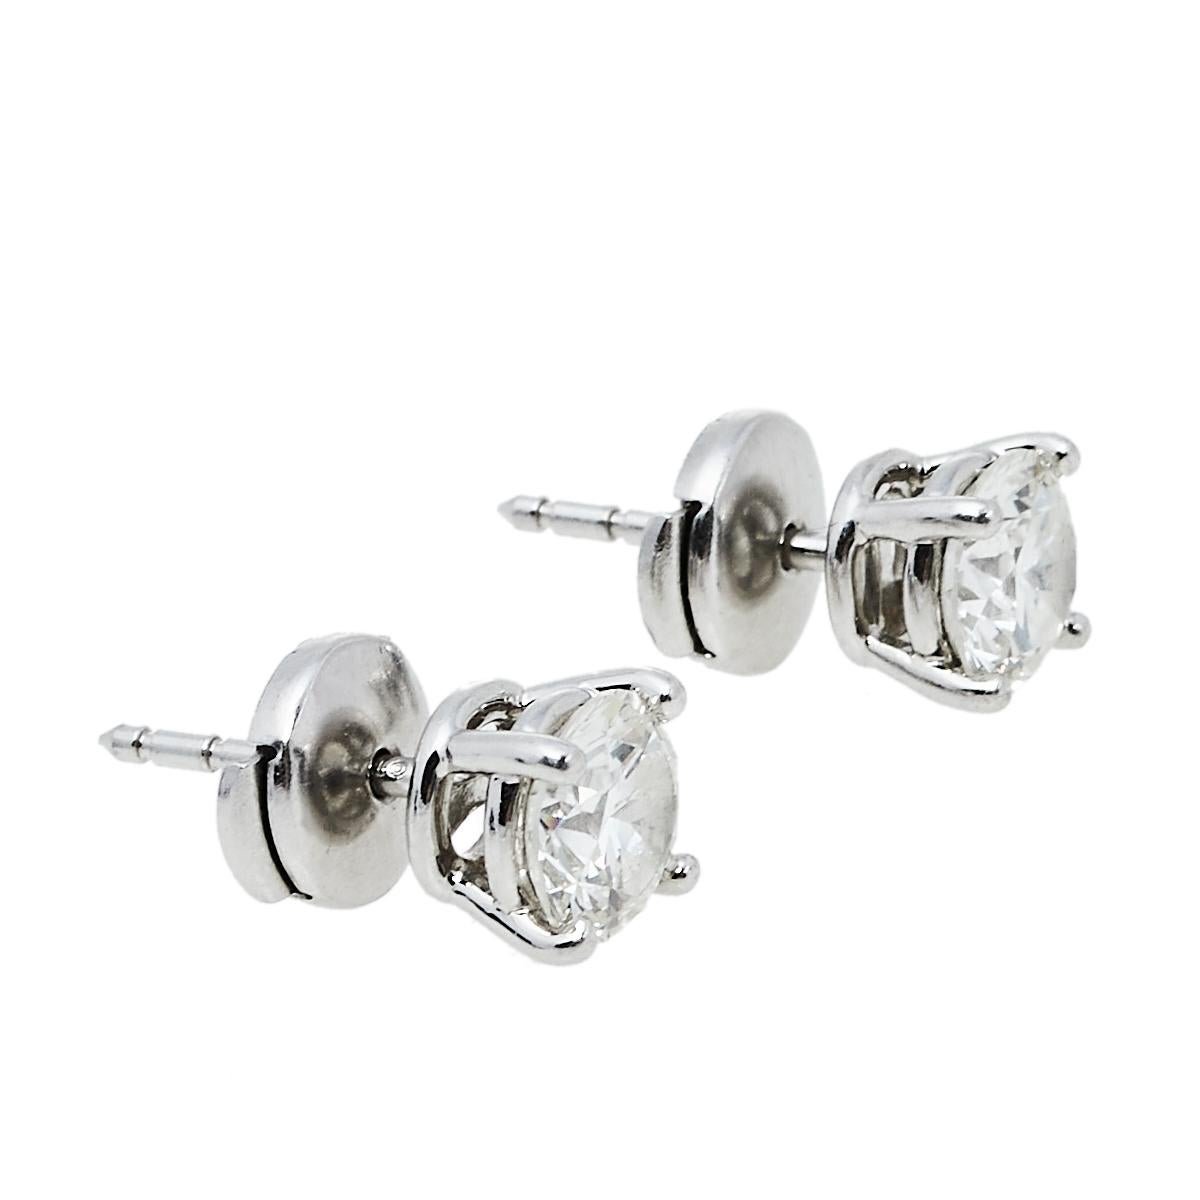 Add this beautiful pair of stud earrings to your Tiffany collection! The pair features solitaire round brilliant-cut diamond studs set in platinum to perfection on 4 prongs. Wear this dazzling pair with your evening attire or formals.

Includes: